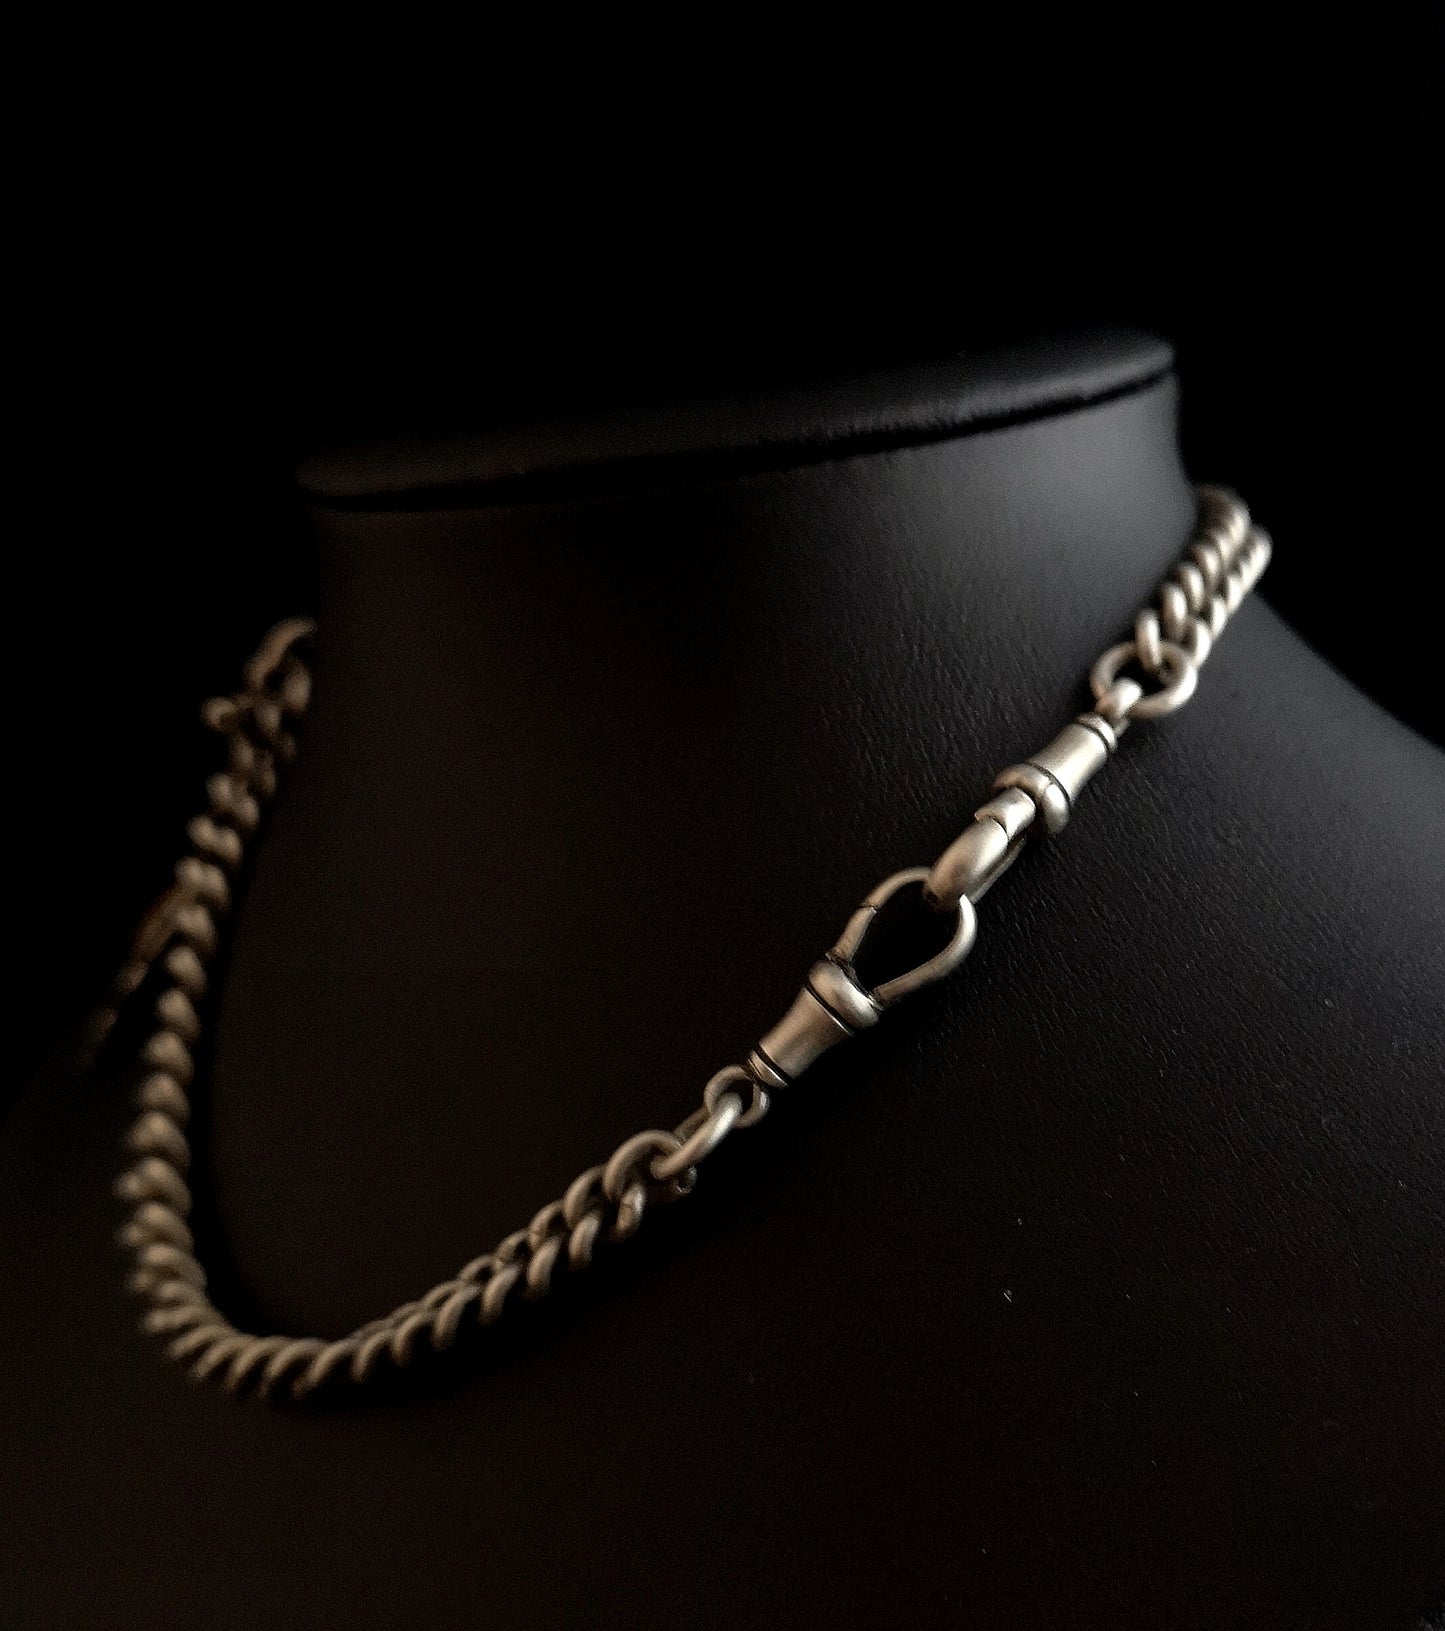 Antique silver Double Albert chain, rose gold fob